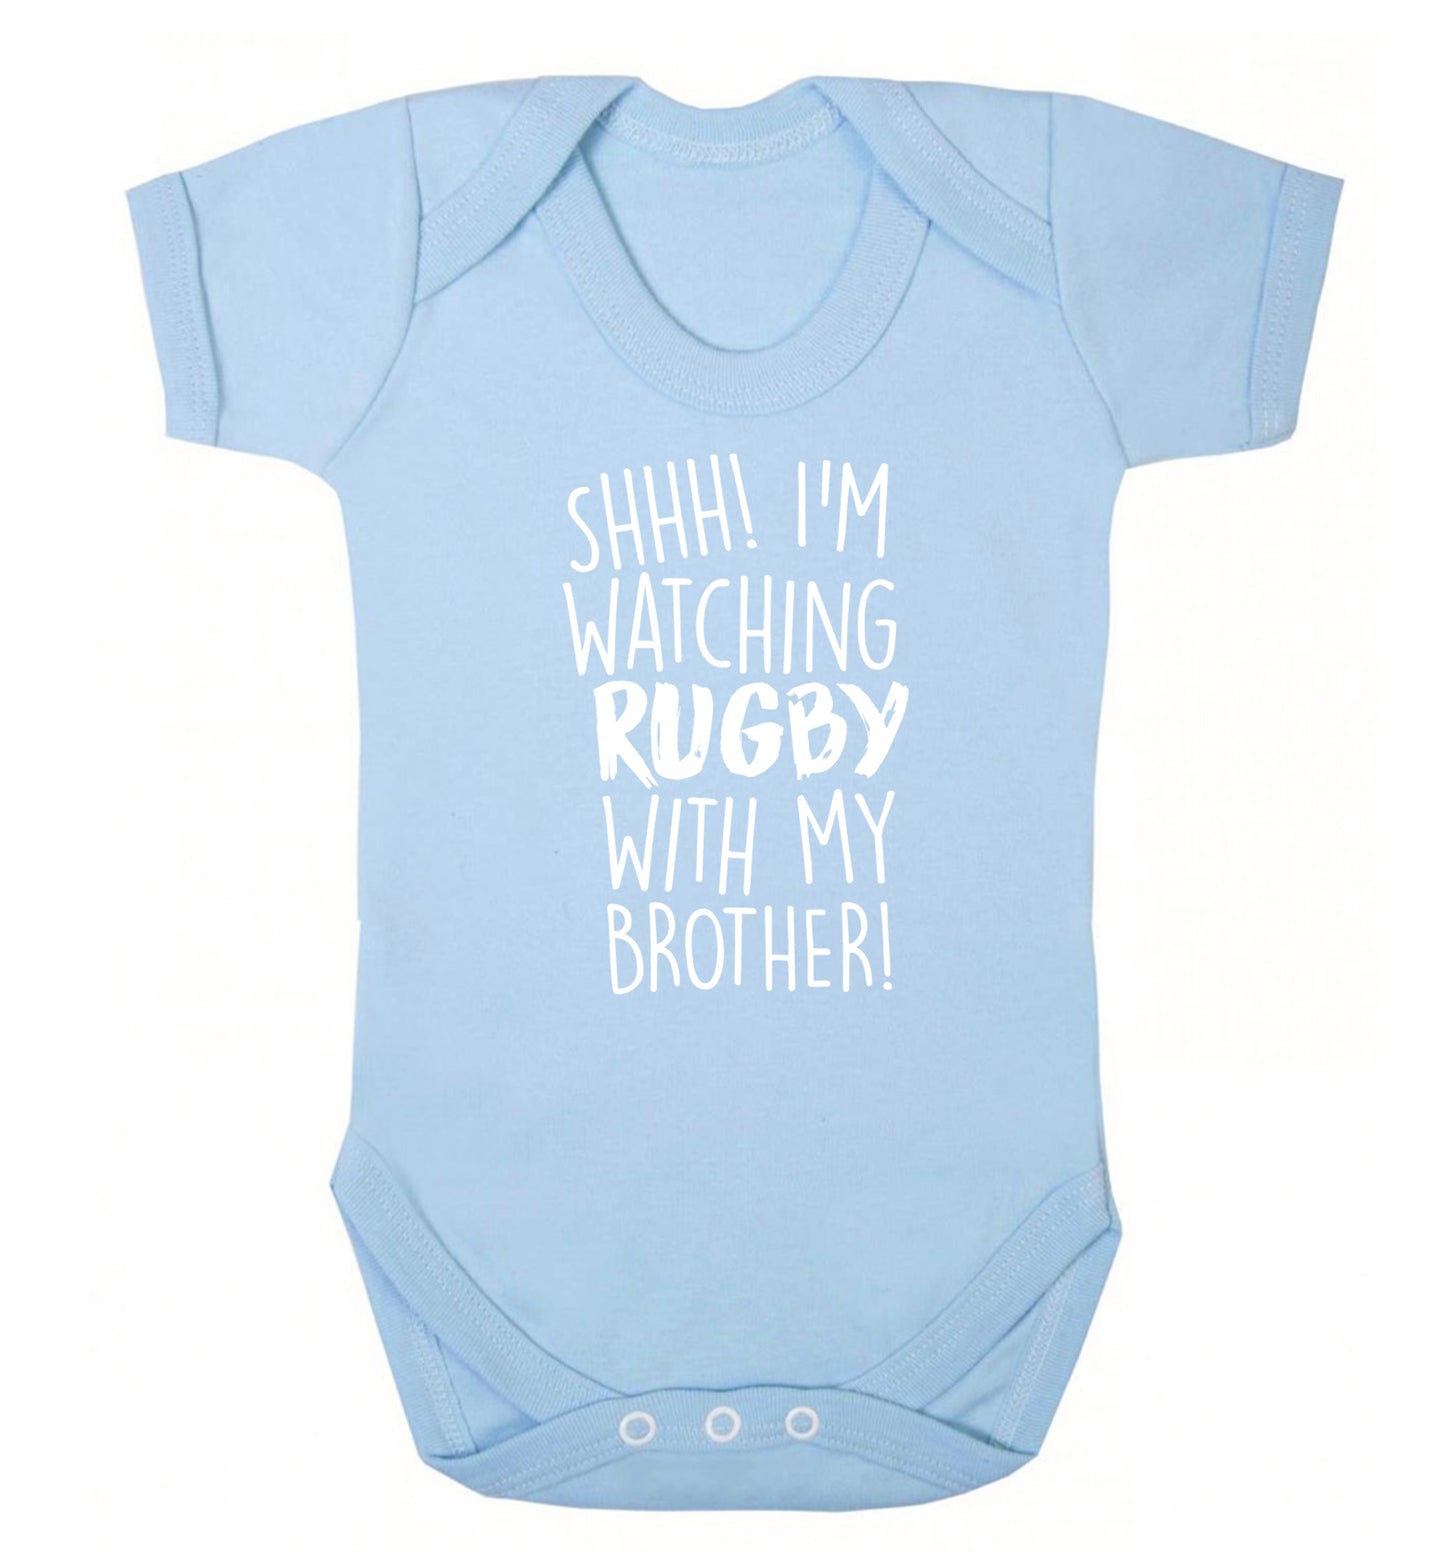 Shh... I'm watching rugby with my brother Baby Vest pale blue 18-24 months